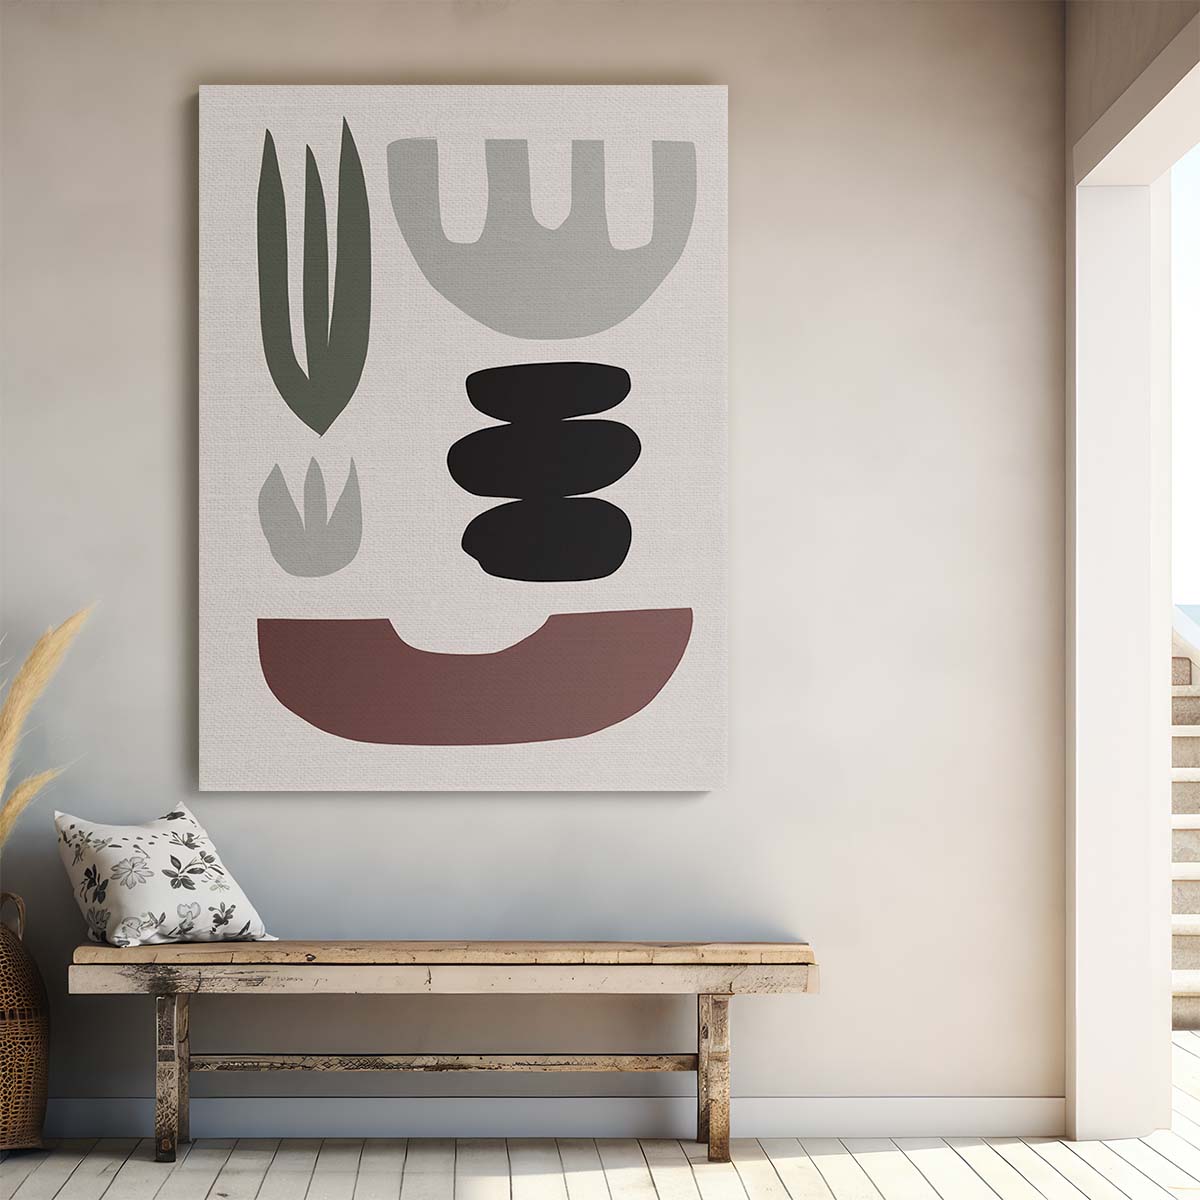 Dan Hobday's Geometric Botanical Abstract Illustration, Minimalistic Wall Art by Luxuriance Designs, made in USA